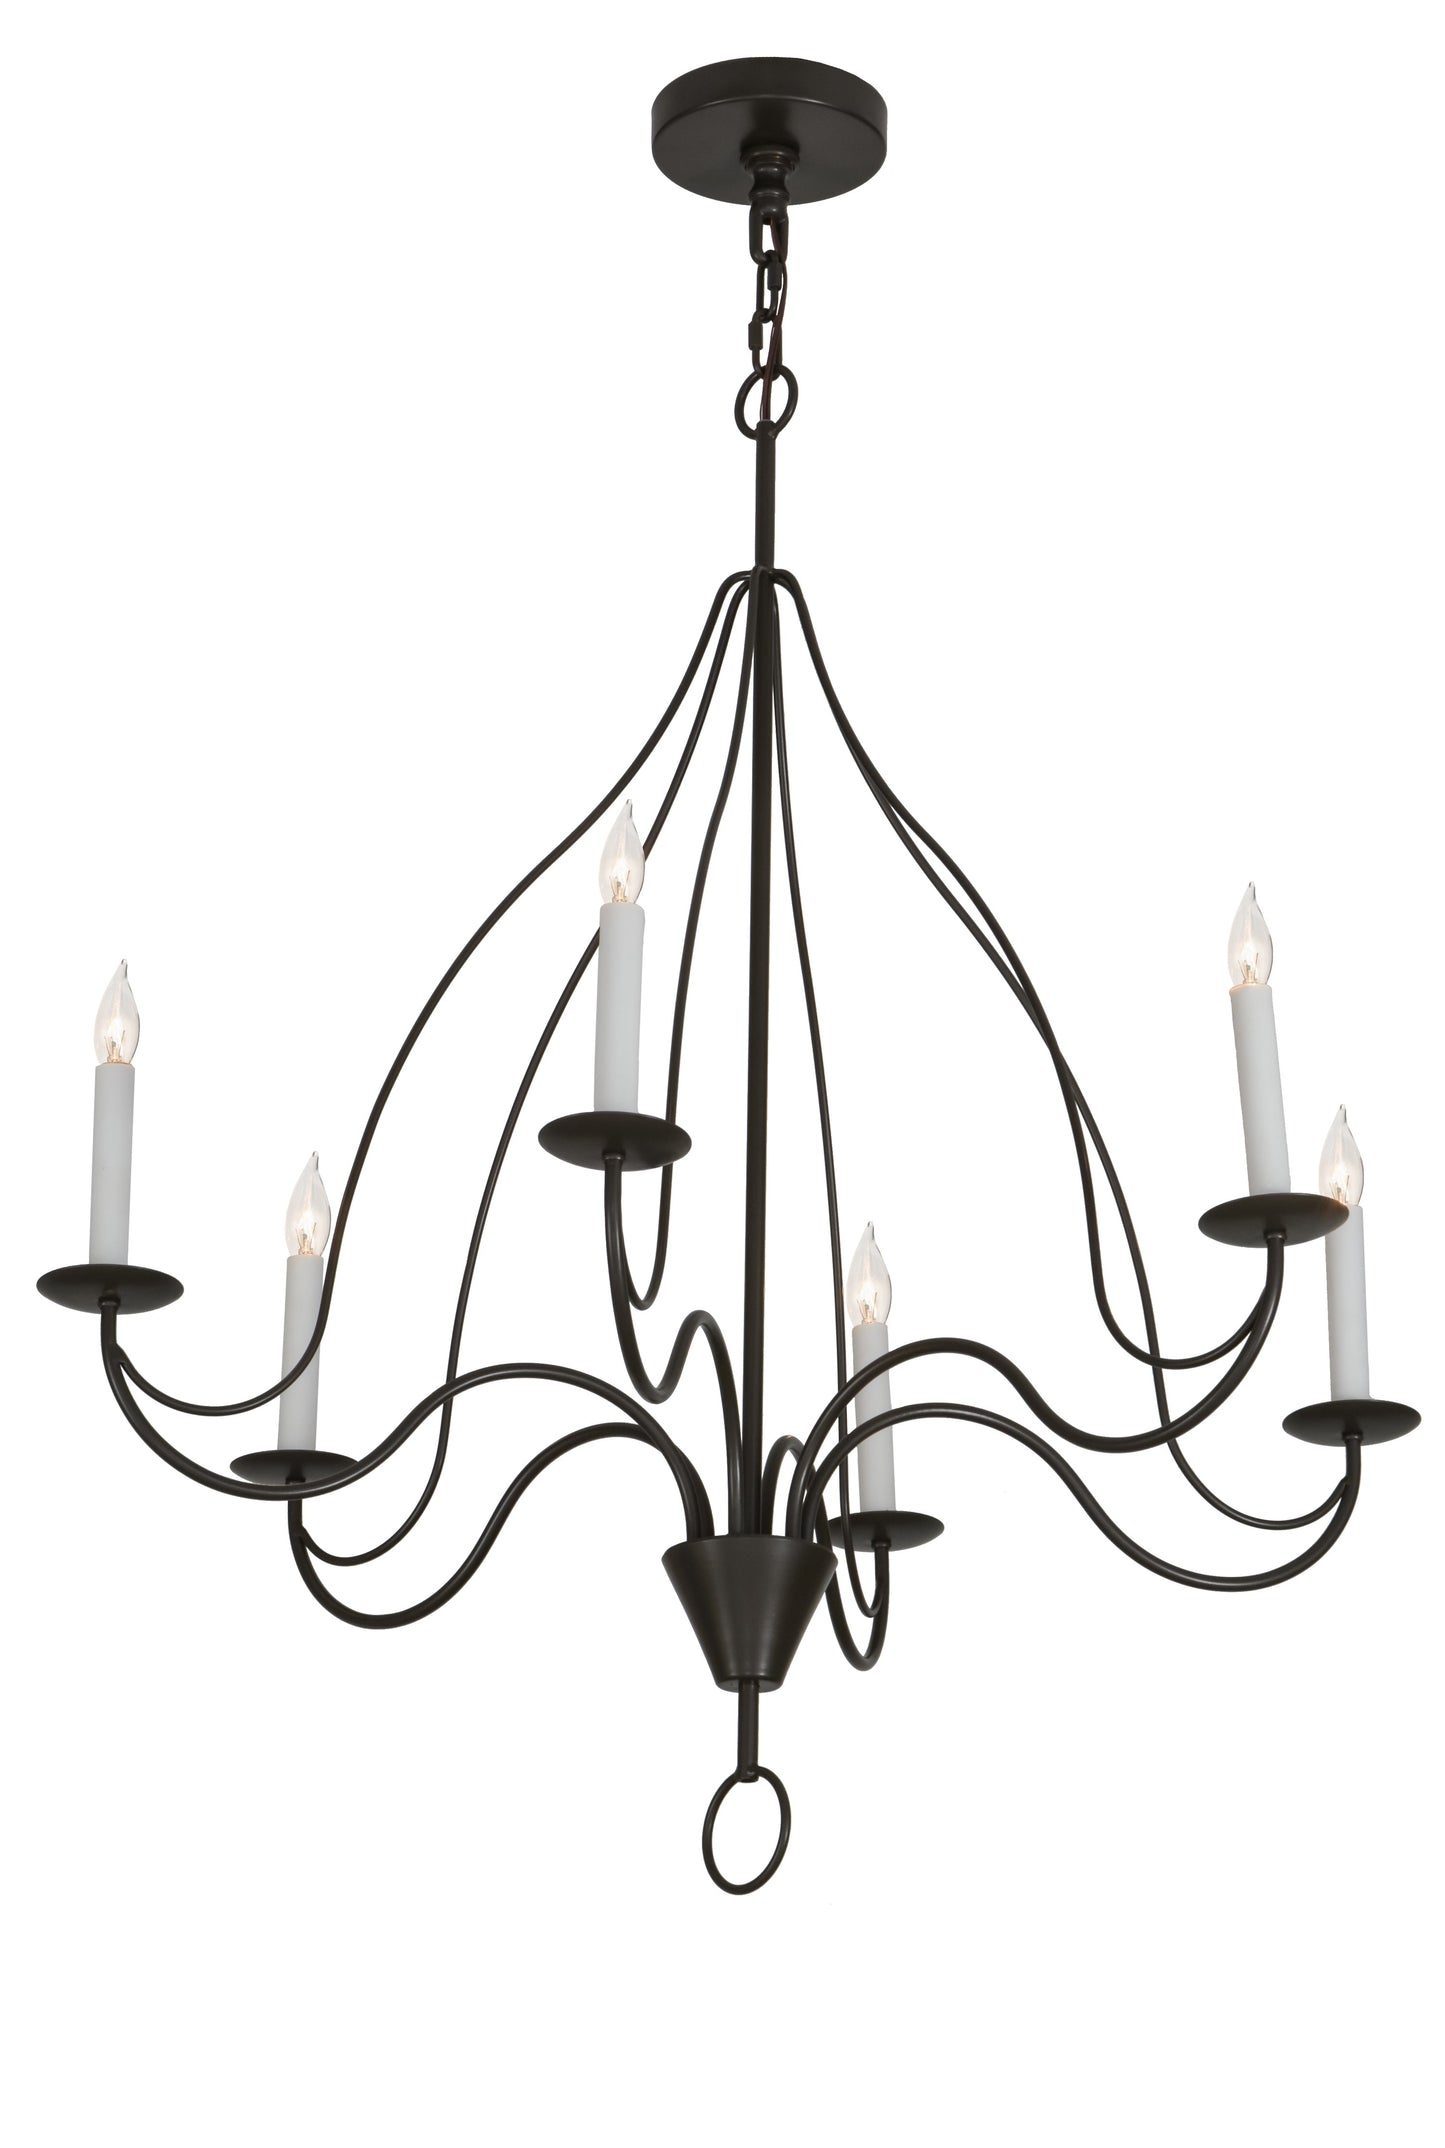 36" Polonaise 6-Light Chandelier by 2nd Ave Lighting